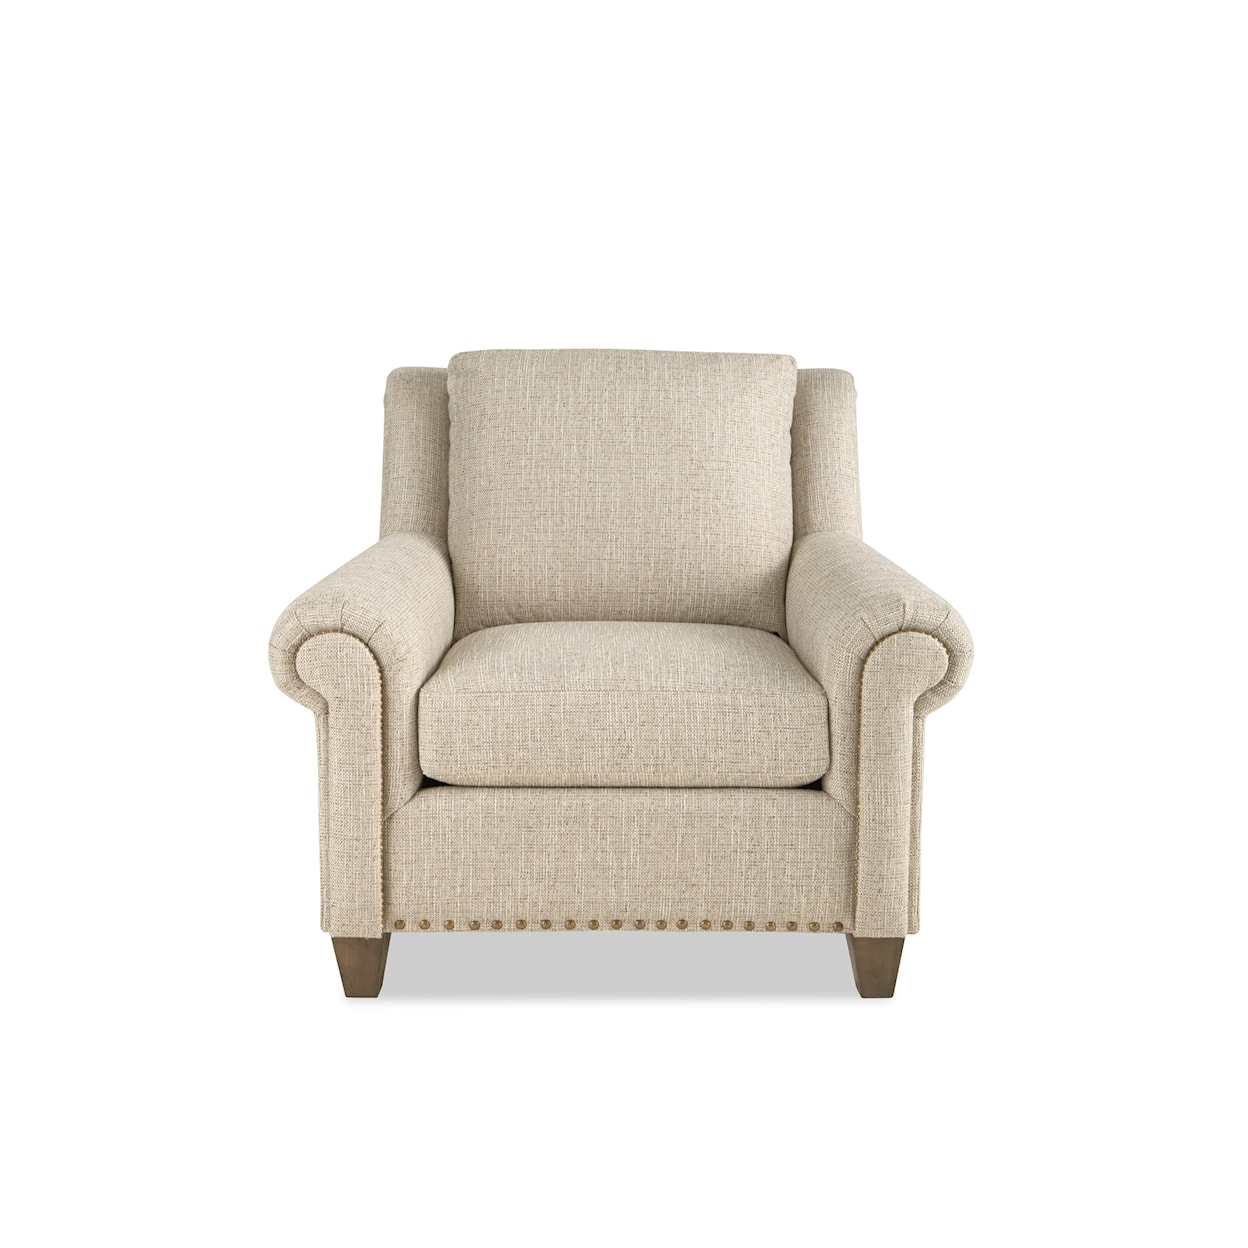 Hickory Craft 730950 Arm Chair